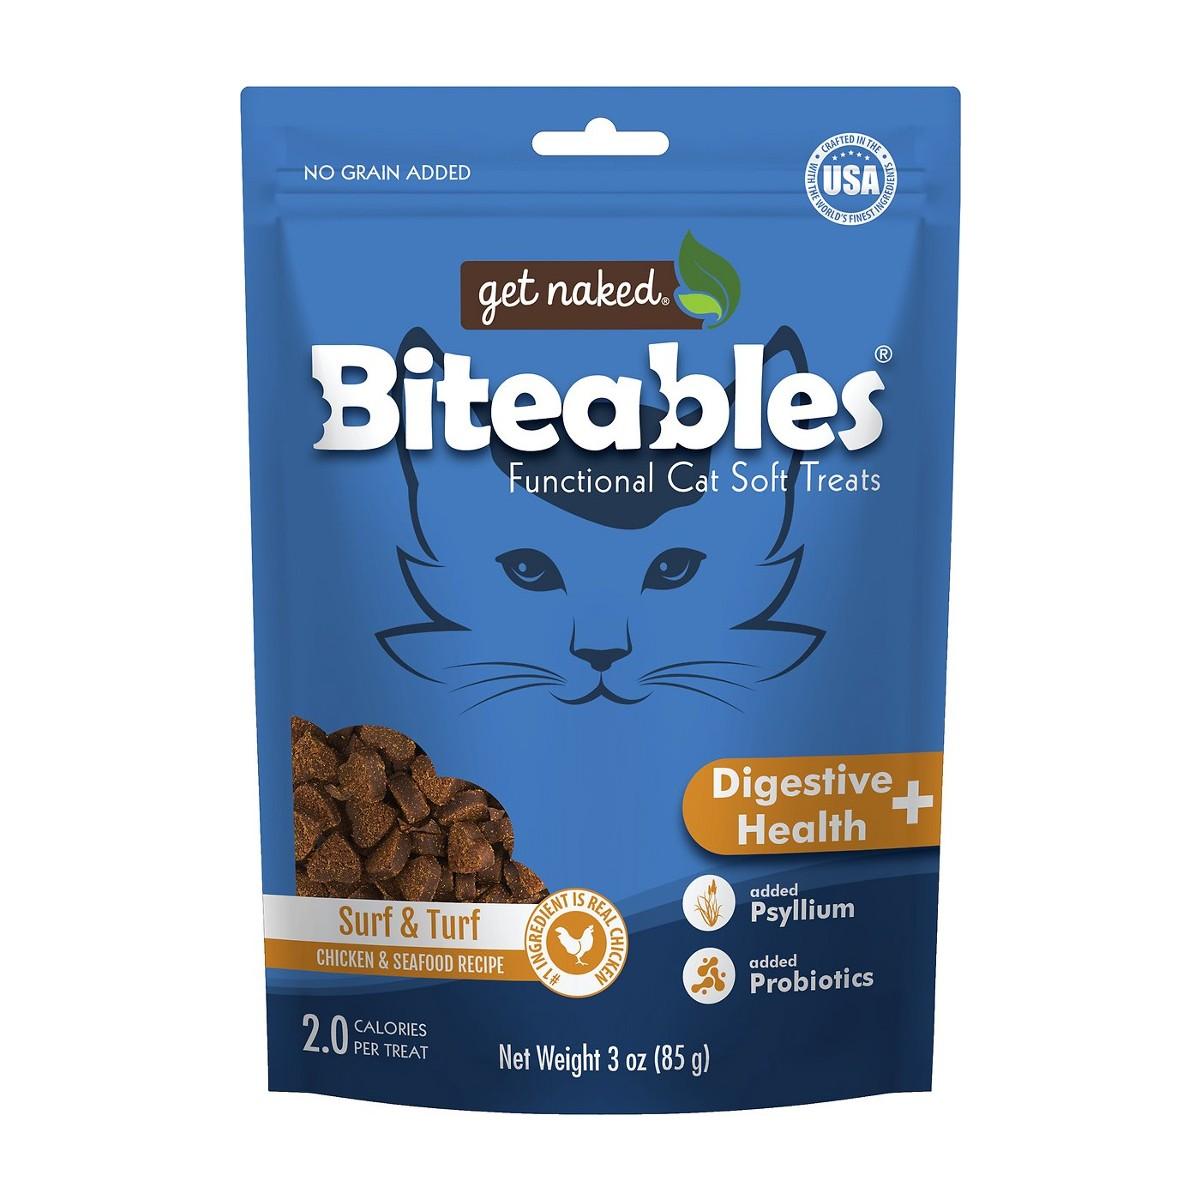 Get Naked Biteables Functional Soft Cat Treats - Digestive Plus